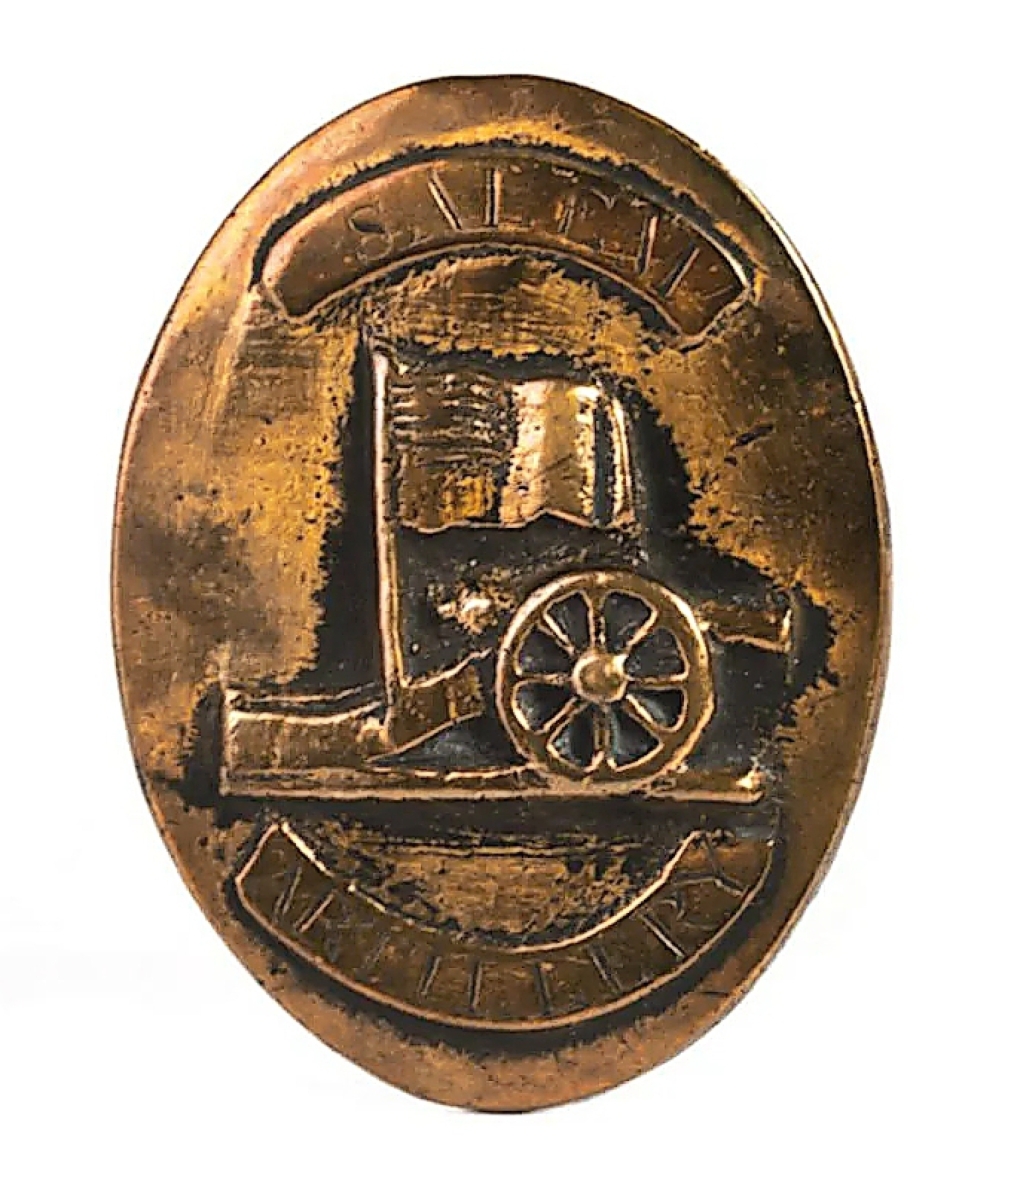 A Salem Artillery shoulder belt plate would sell for $6,755. The plate likely marked a member of the Salem Flying Artillery, a Confederate regiment raised in Virginia.